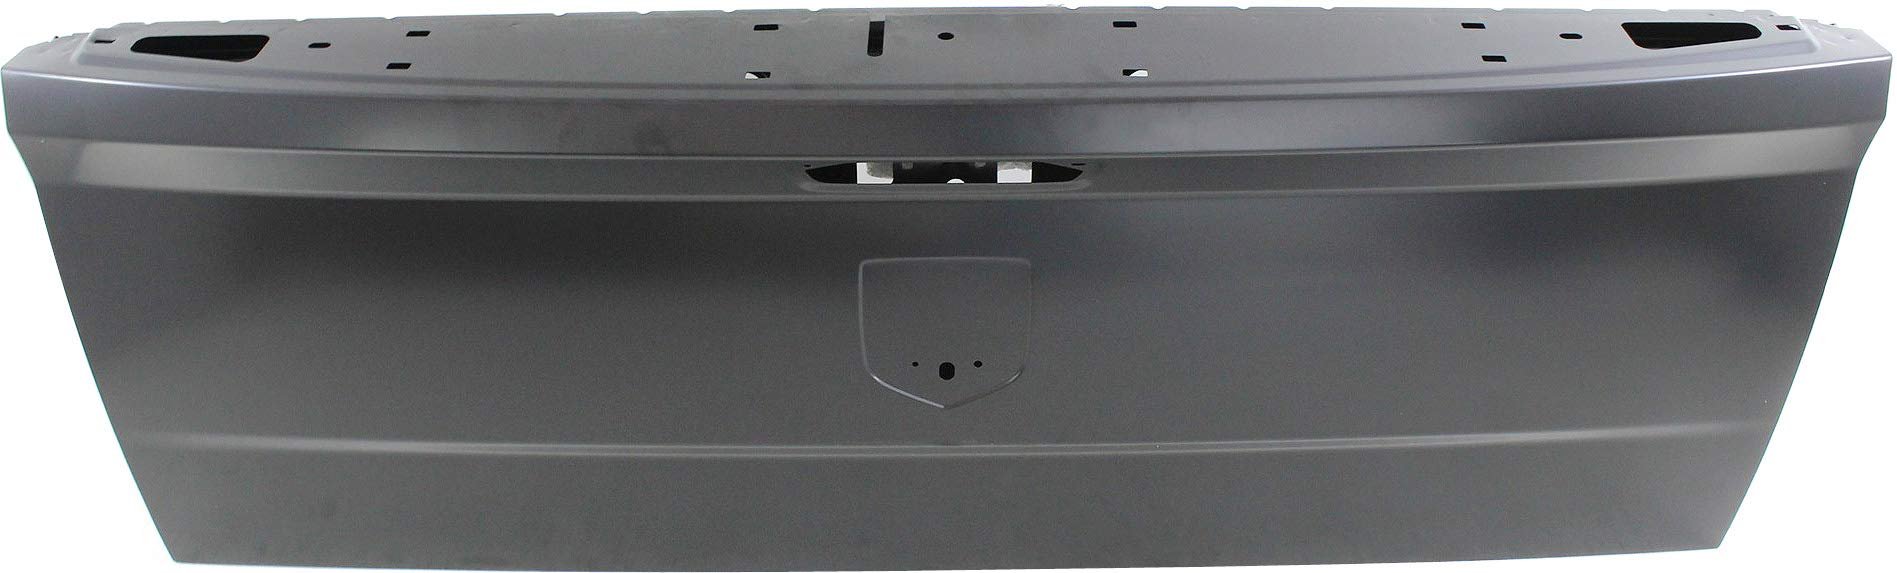 Garage-Pro Tailgate Compatible with 2011-2018 Ram 1500, 2500, Fits 2009-2010 Dodge Ram 1500 and 2010 Ram 2500